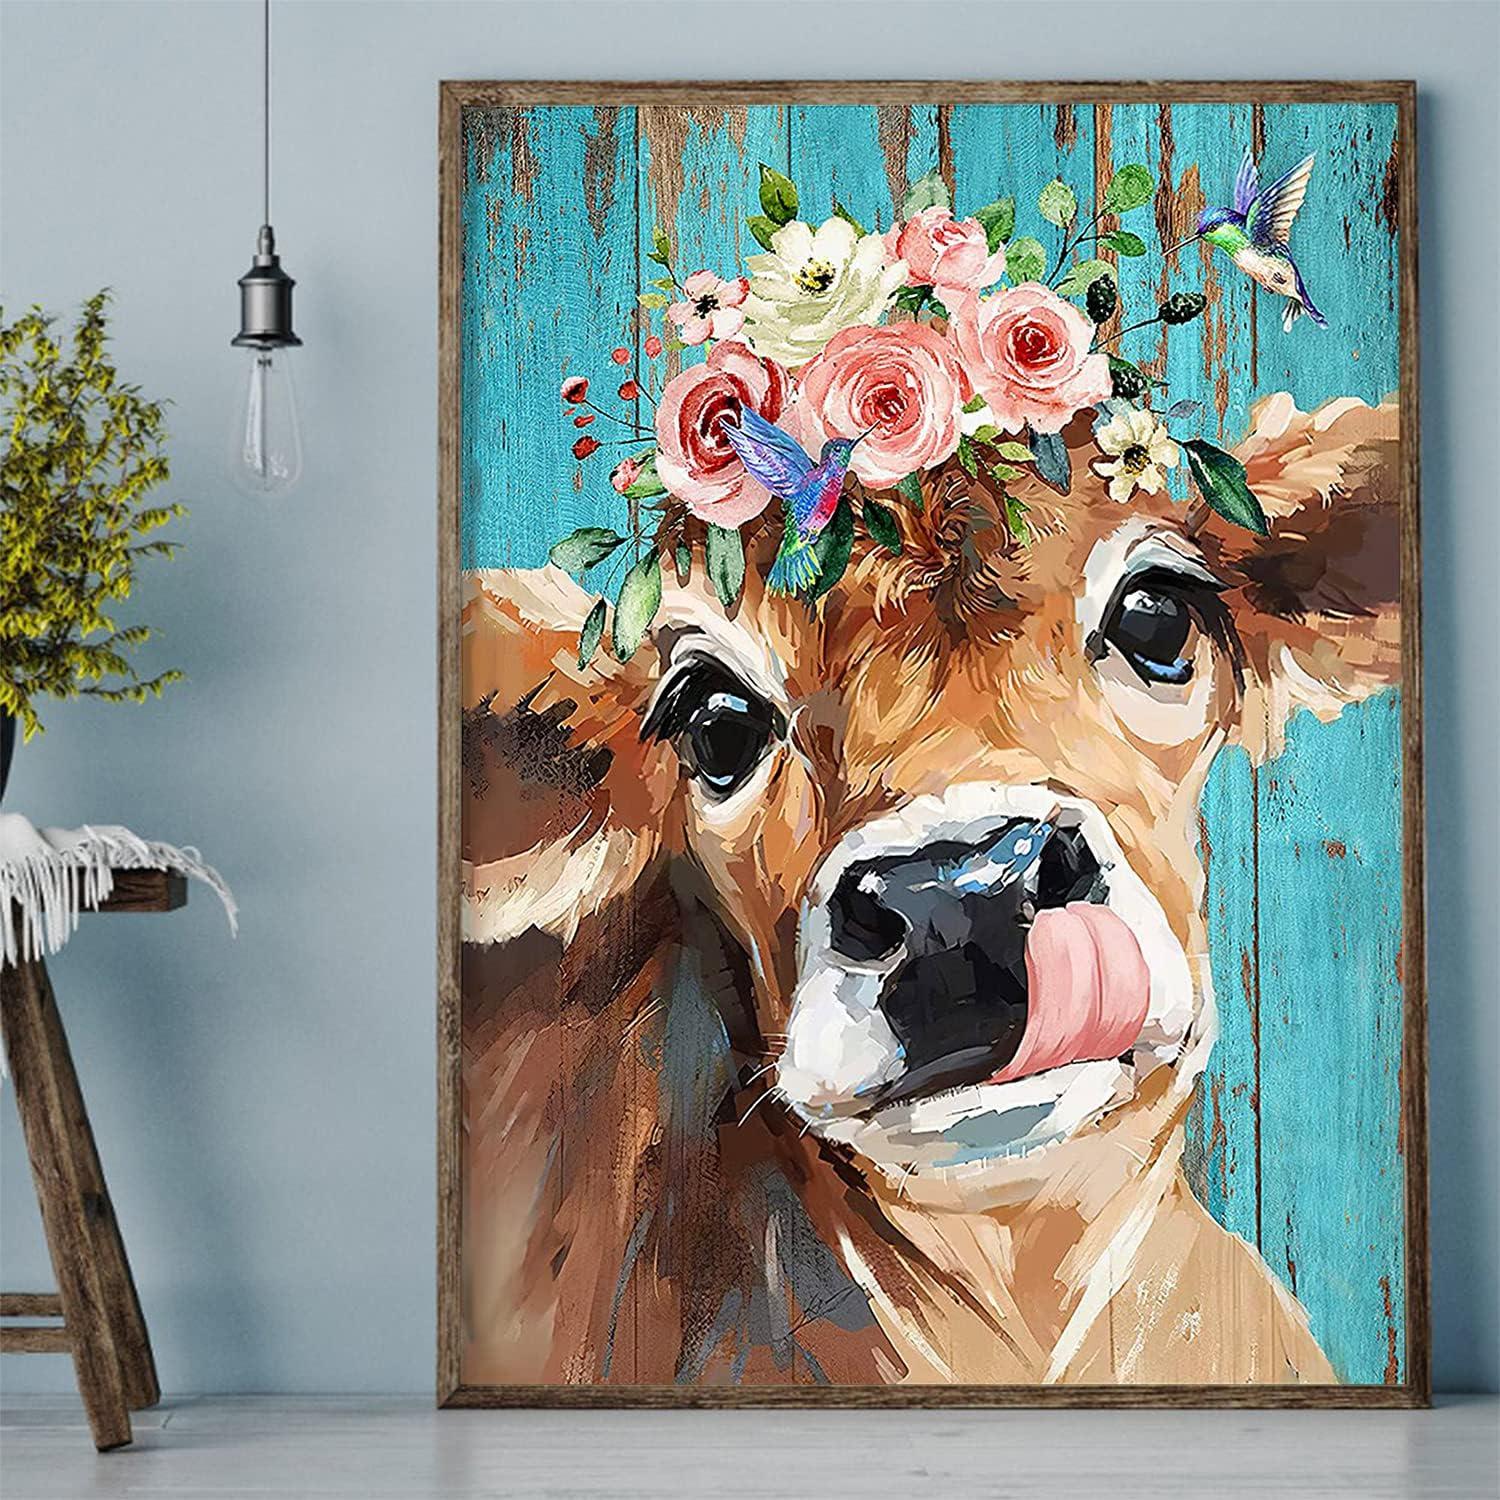 Completed DIAMOND PAINTING art WALL HANGING finished COW abstract